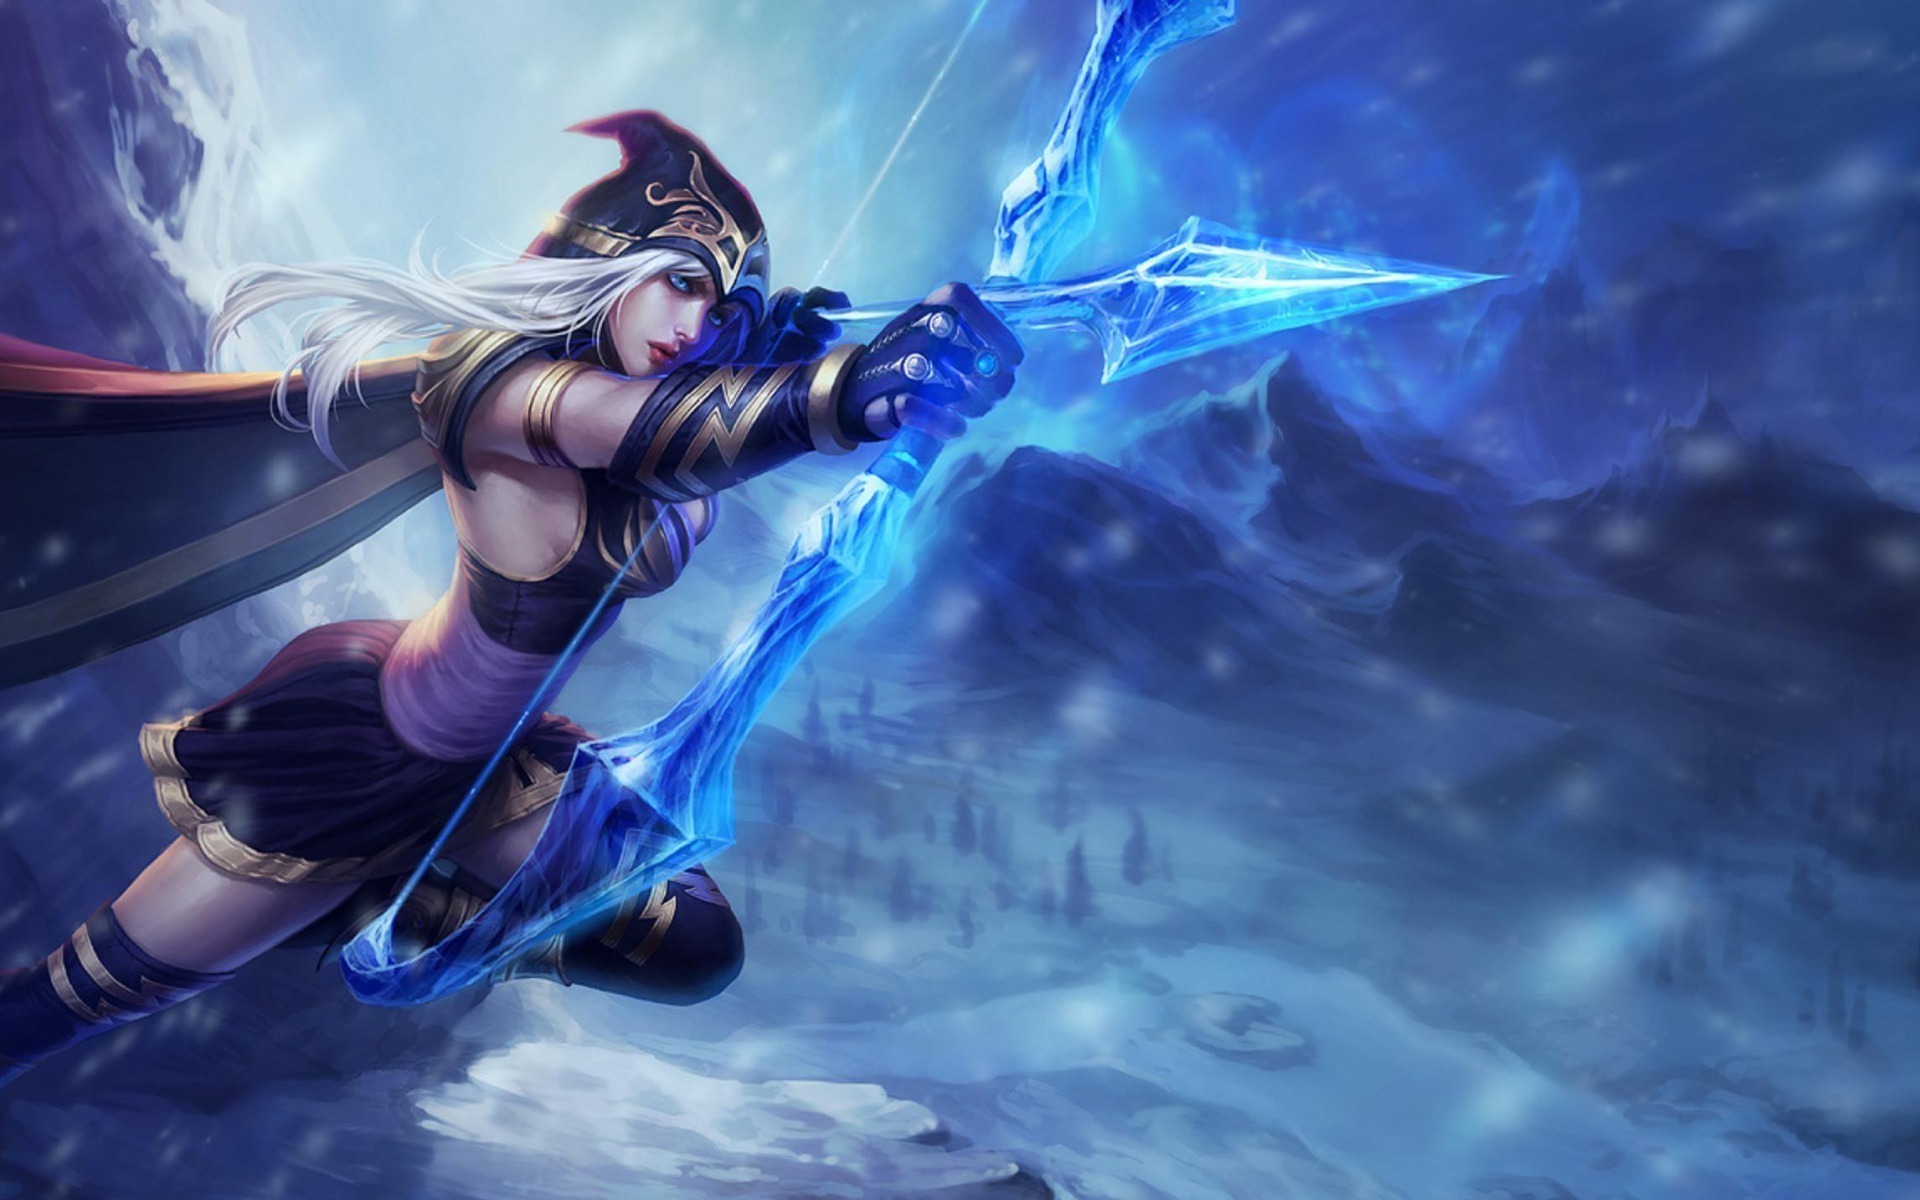 Comparing the Conceptions of Male and Female Characters in League of Legends